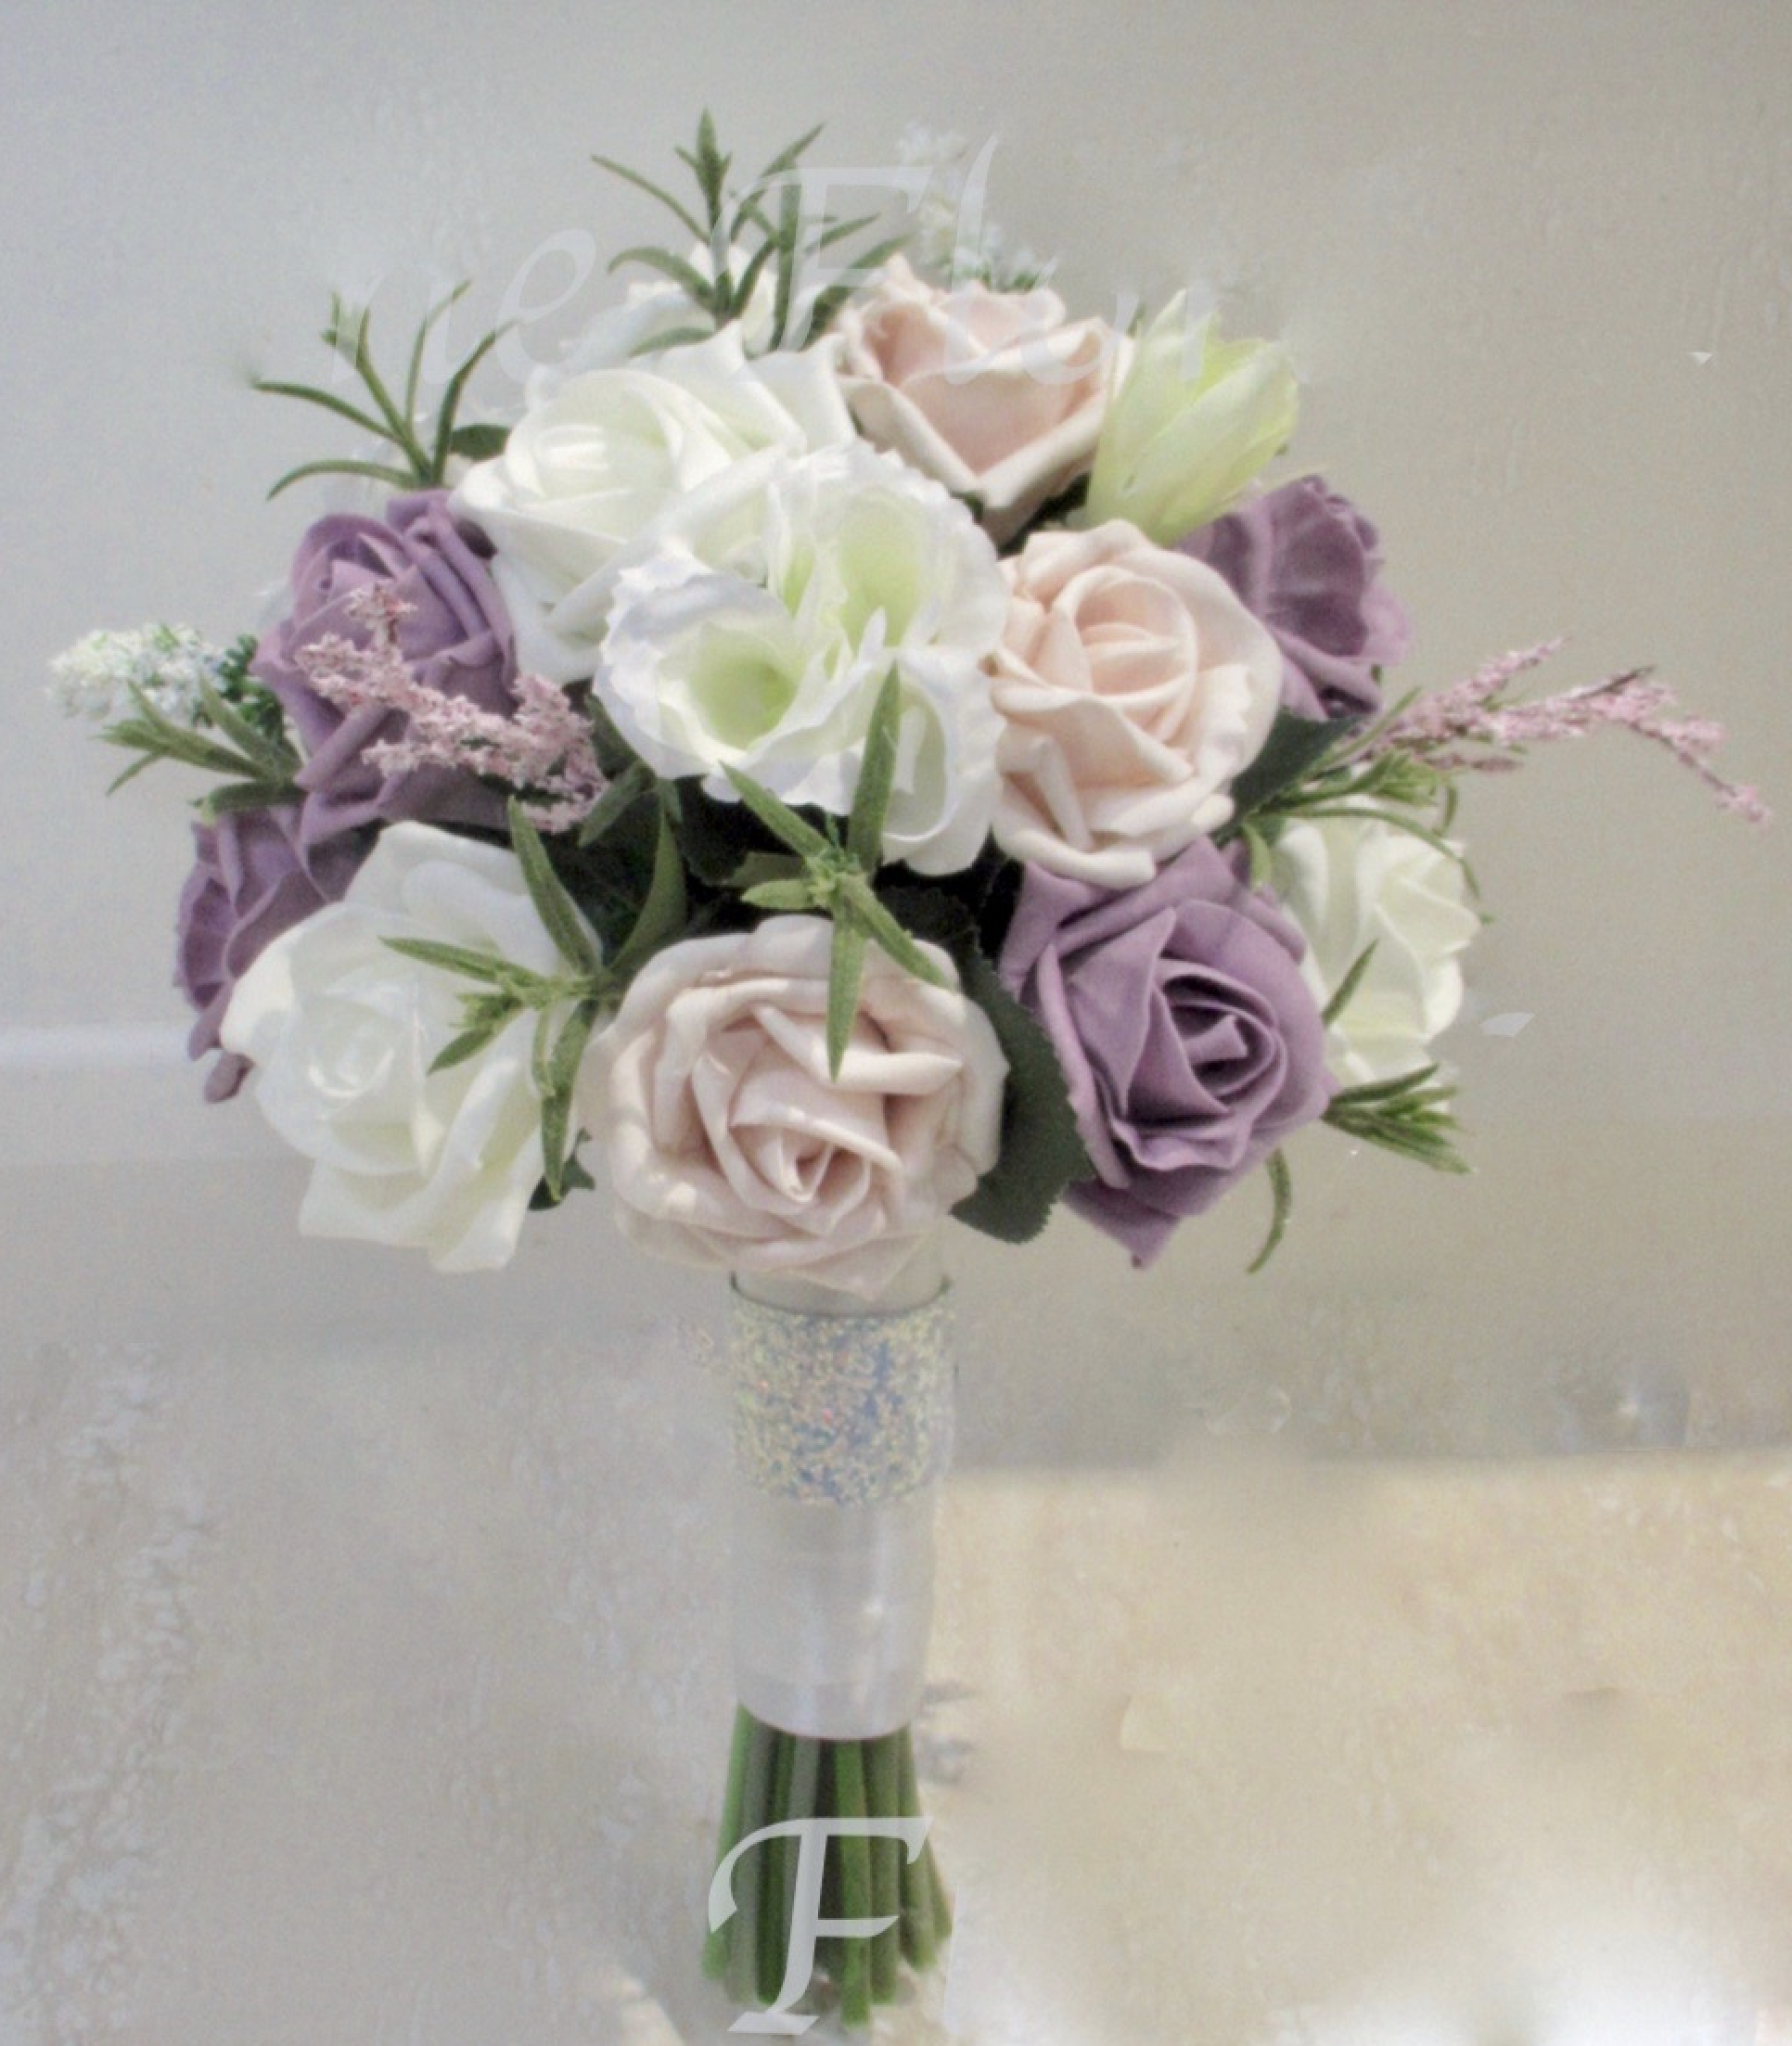 Mauve and pink wedding flowers, pink and mauve bridesmaid bouquet